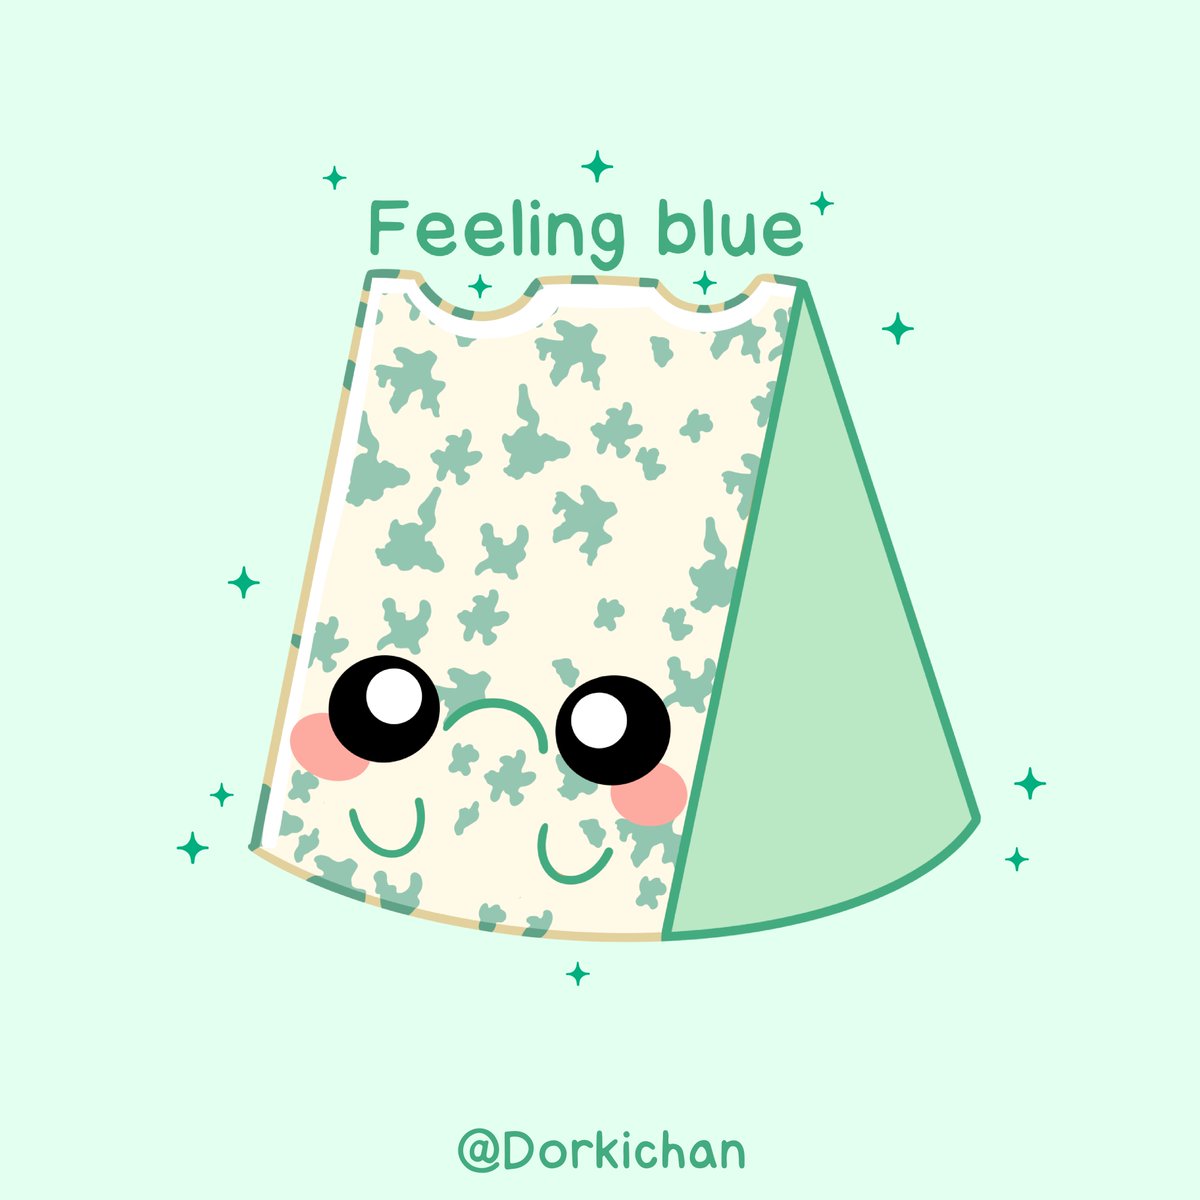 Sometimes we all have days where we feel a lil blue. 
And I want to remind you that it's totally normal. 
Take your rest day love and try again tomorrow 😥💙!
#cheesepun #foodpun #kawaii #bluecheese #mentalhealth #cutearteveryday #dorkichan #dorkichanart #art